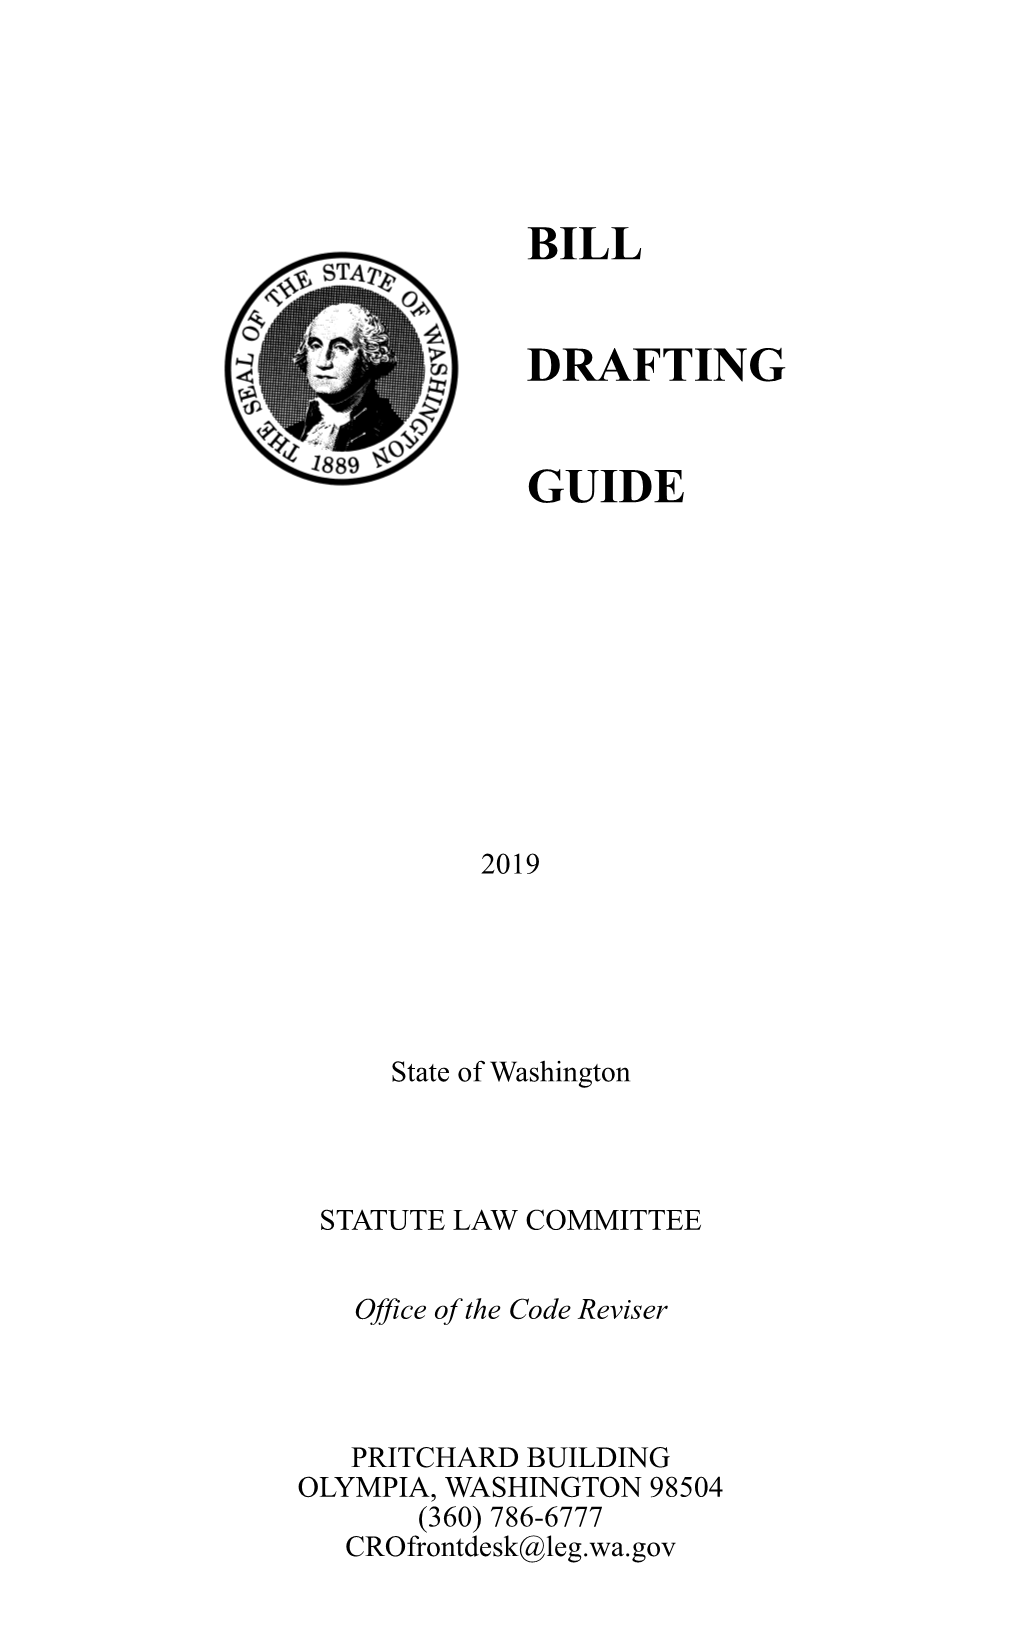 BILL DRAFTING GUIDE 2019 PREFACE the Office of the Code Reviser Created This Bill Drafting Guide for the Preparation of Bills for the Washington Legislature